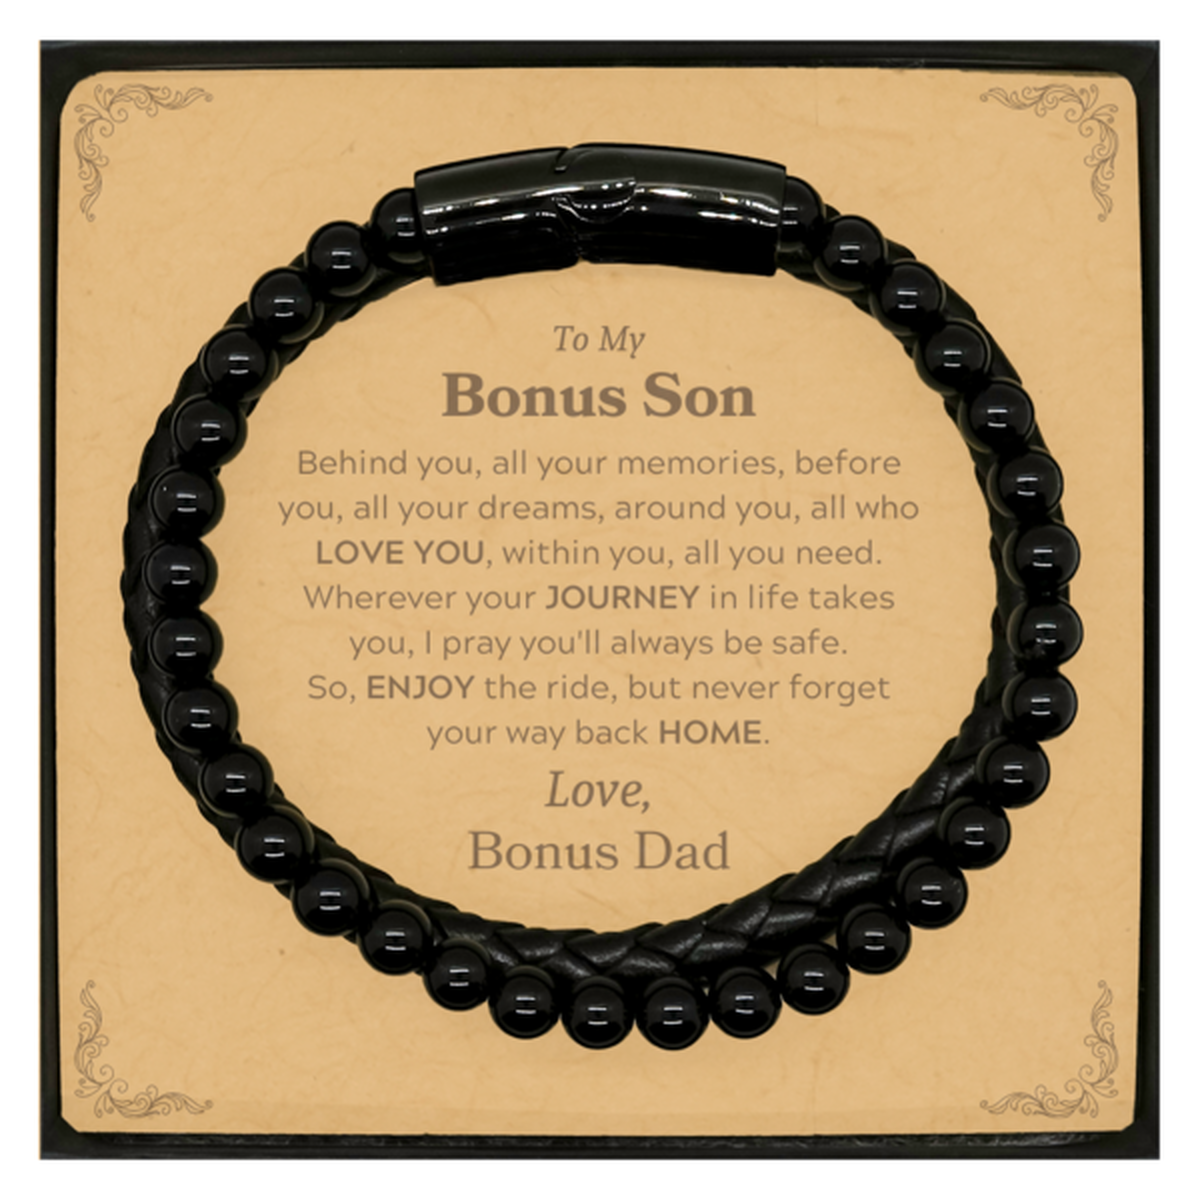 To My Bonus Son Graduation Gifts from Bonus Dad, Bonus Son Stone Leather Bracelets Christmas Birthday Gifts for Bonus Son Behind you, all your memories, before you, all your dreams. Love, Bonus Dad